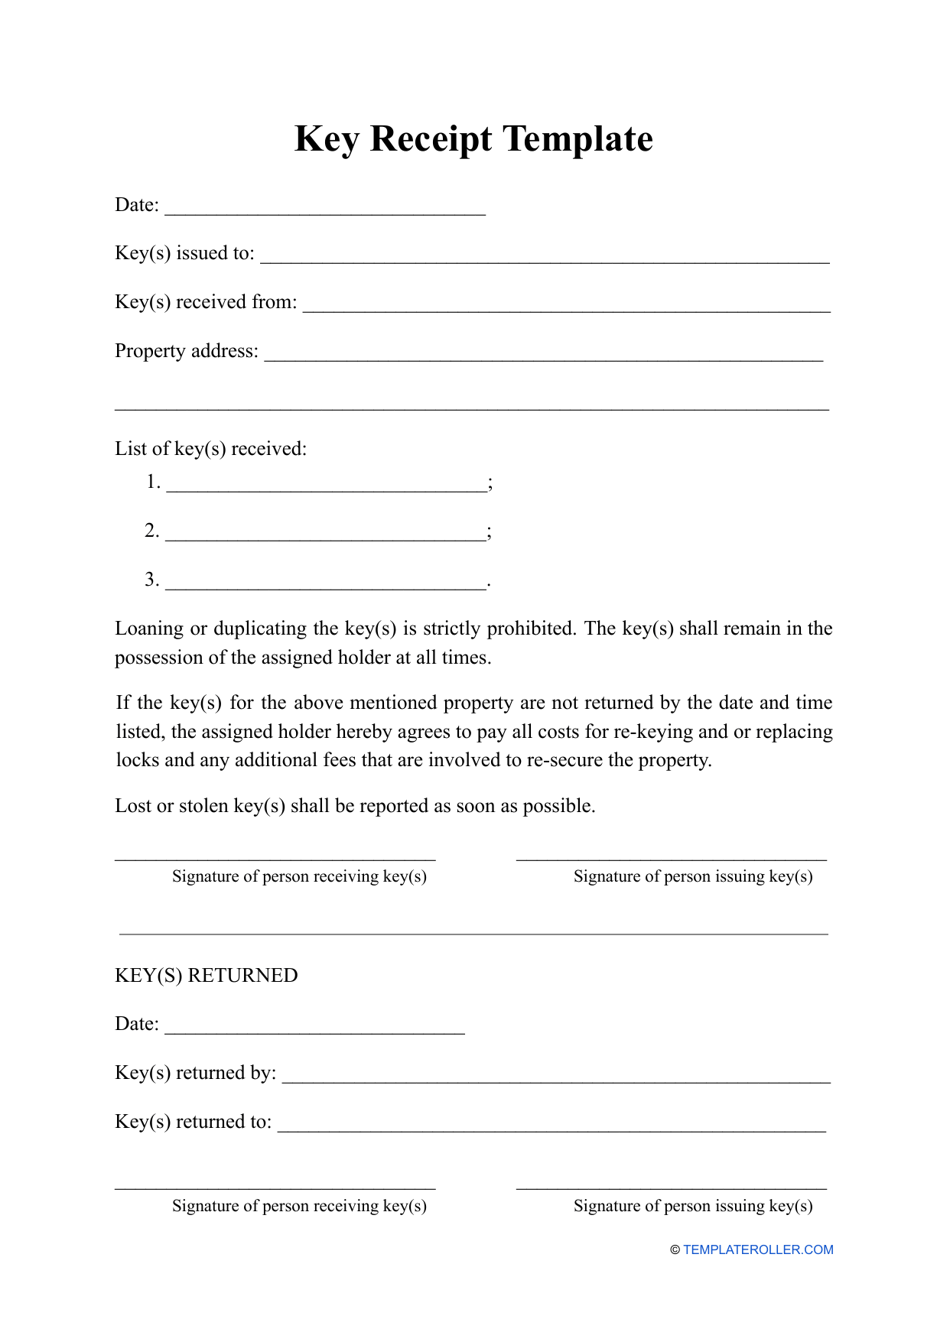 Key Receipt Template, Page 1